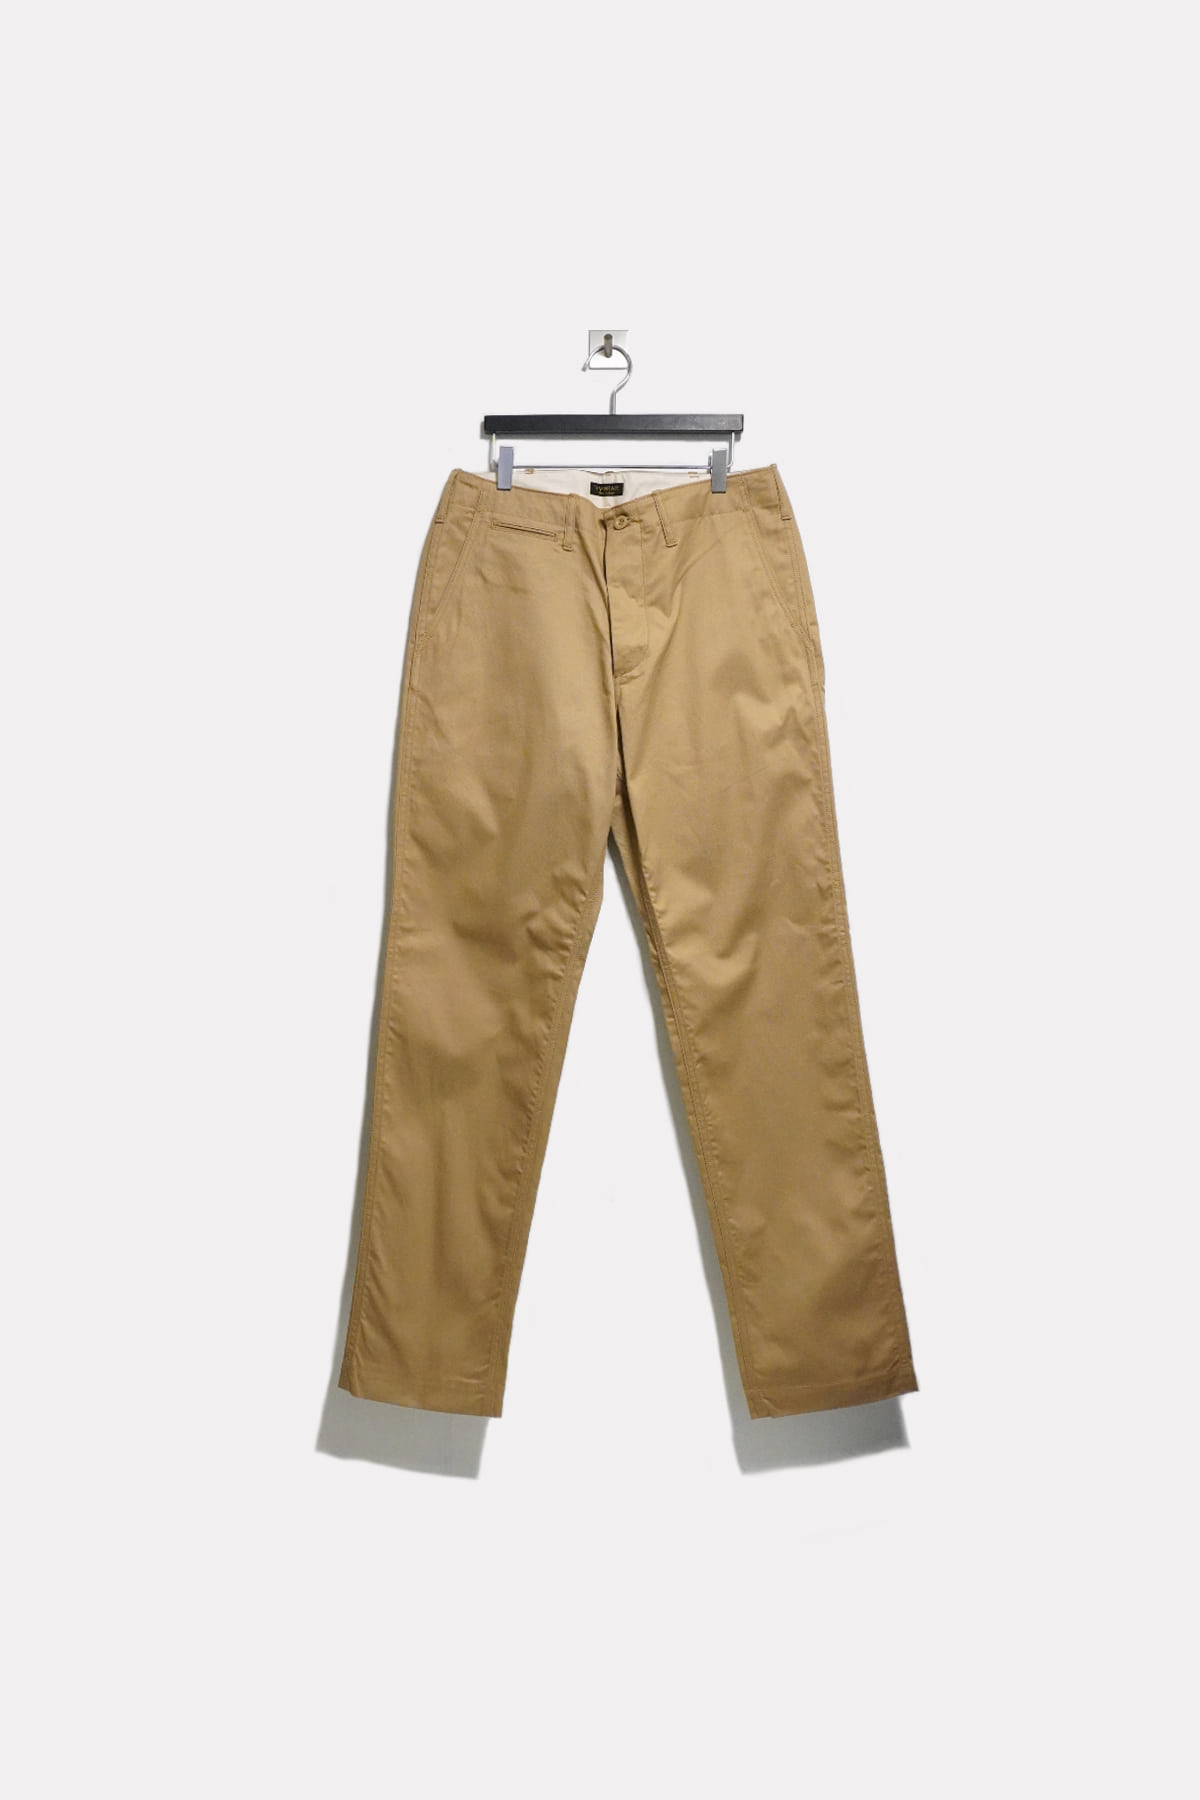 [A VONTADE] Classic Chino Trousers (Regular Fit) - Beige